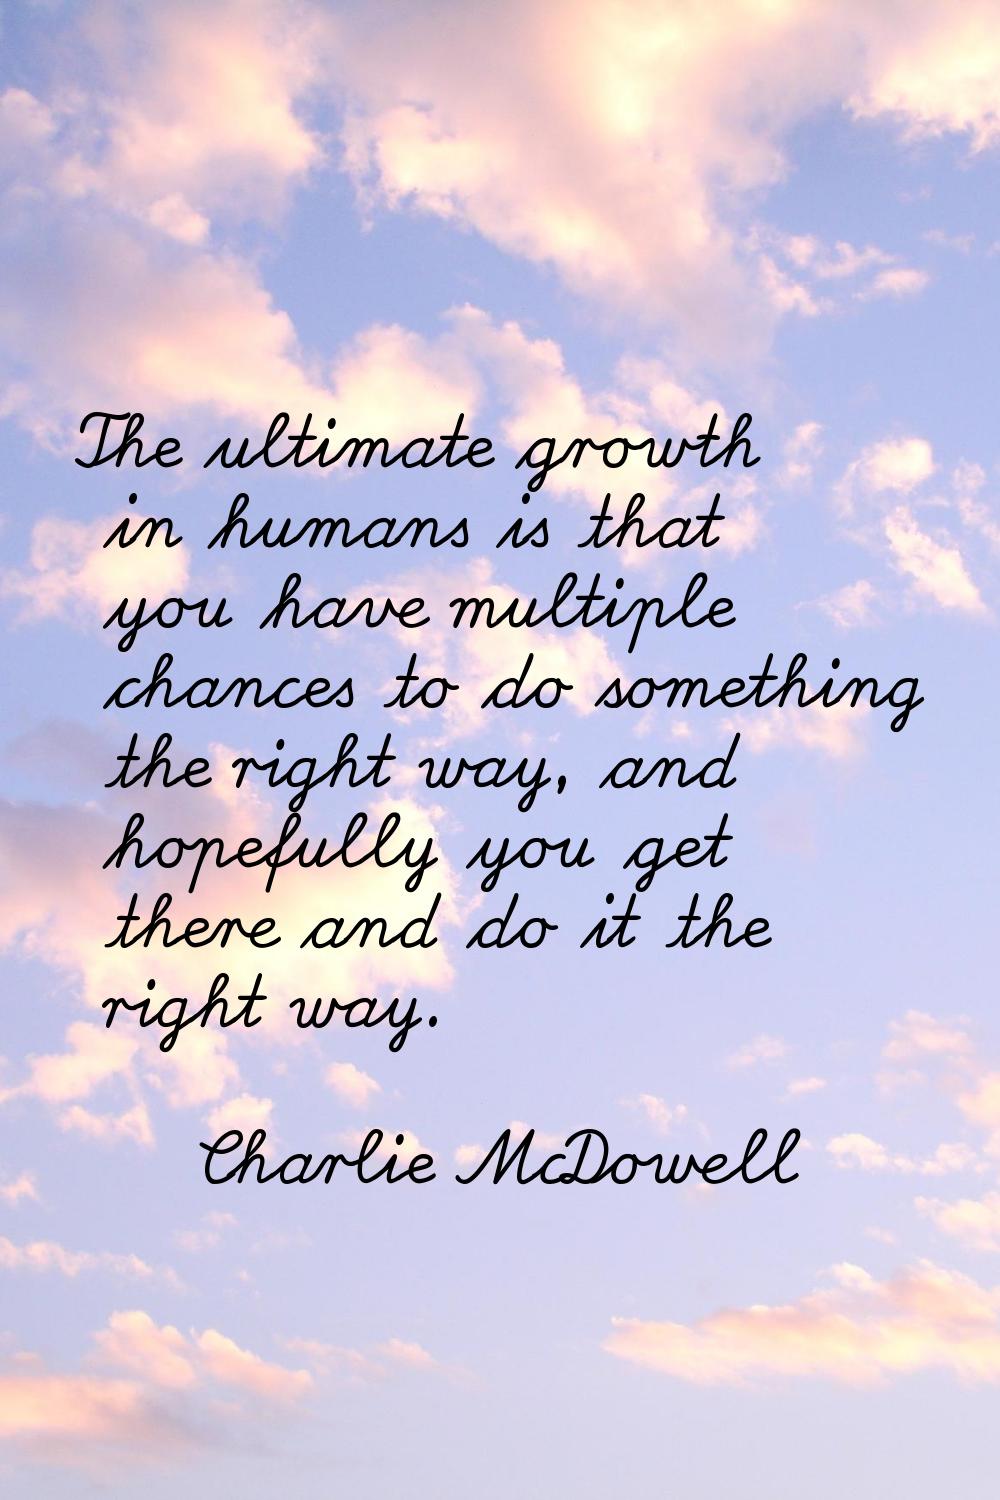 The ultimate growth in humans is that you have multiple chances to do something the right way, and 